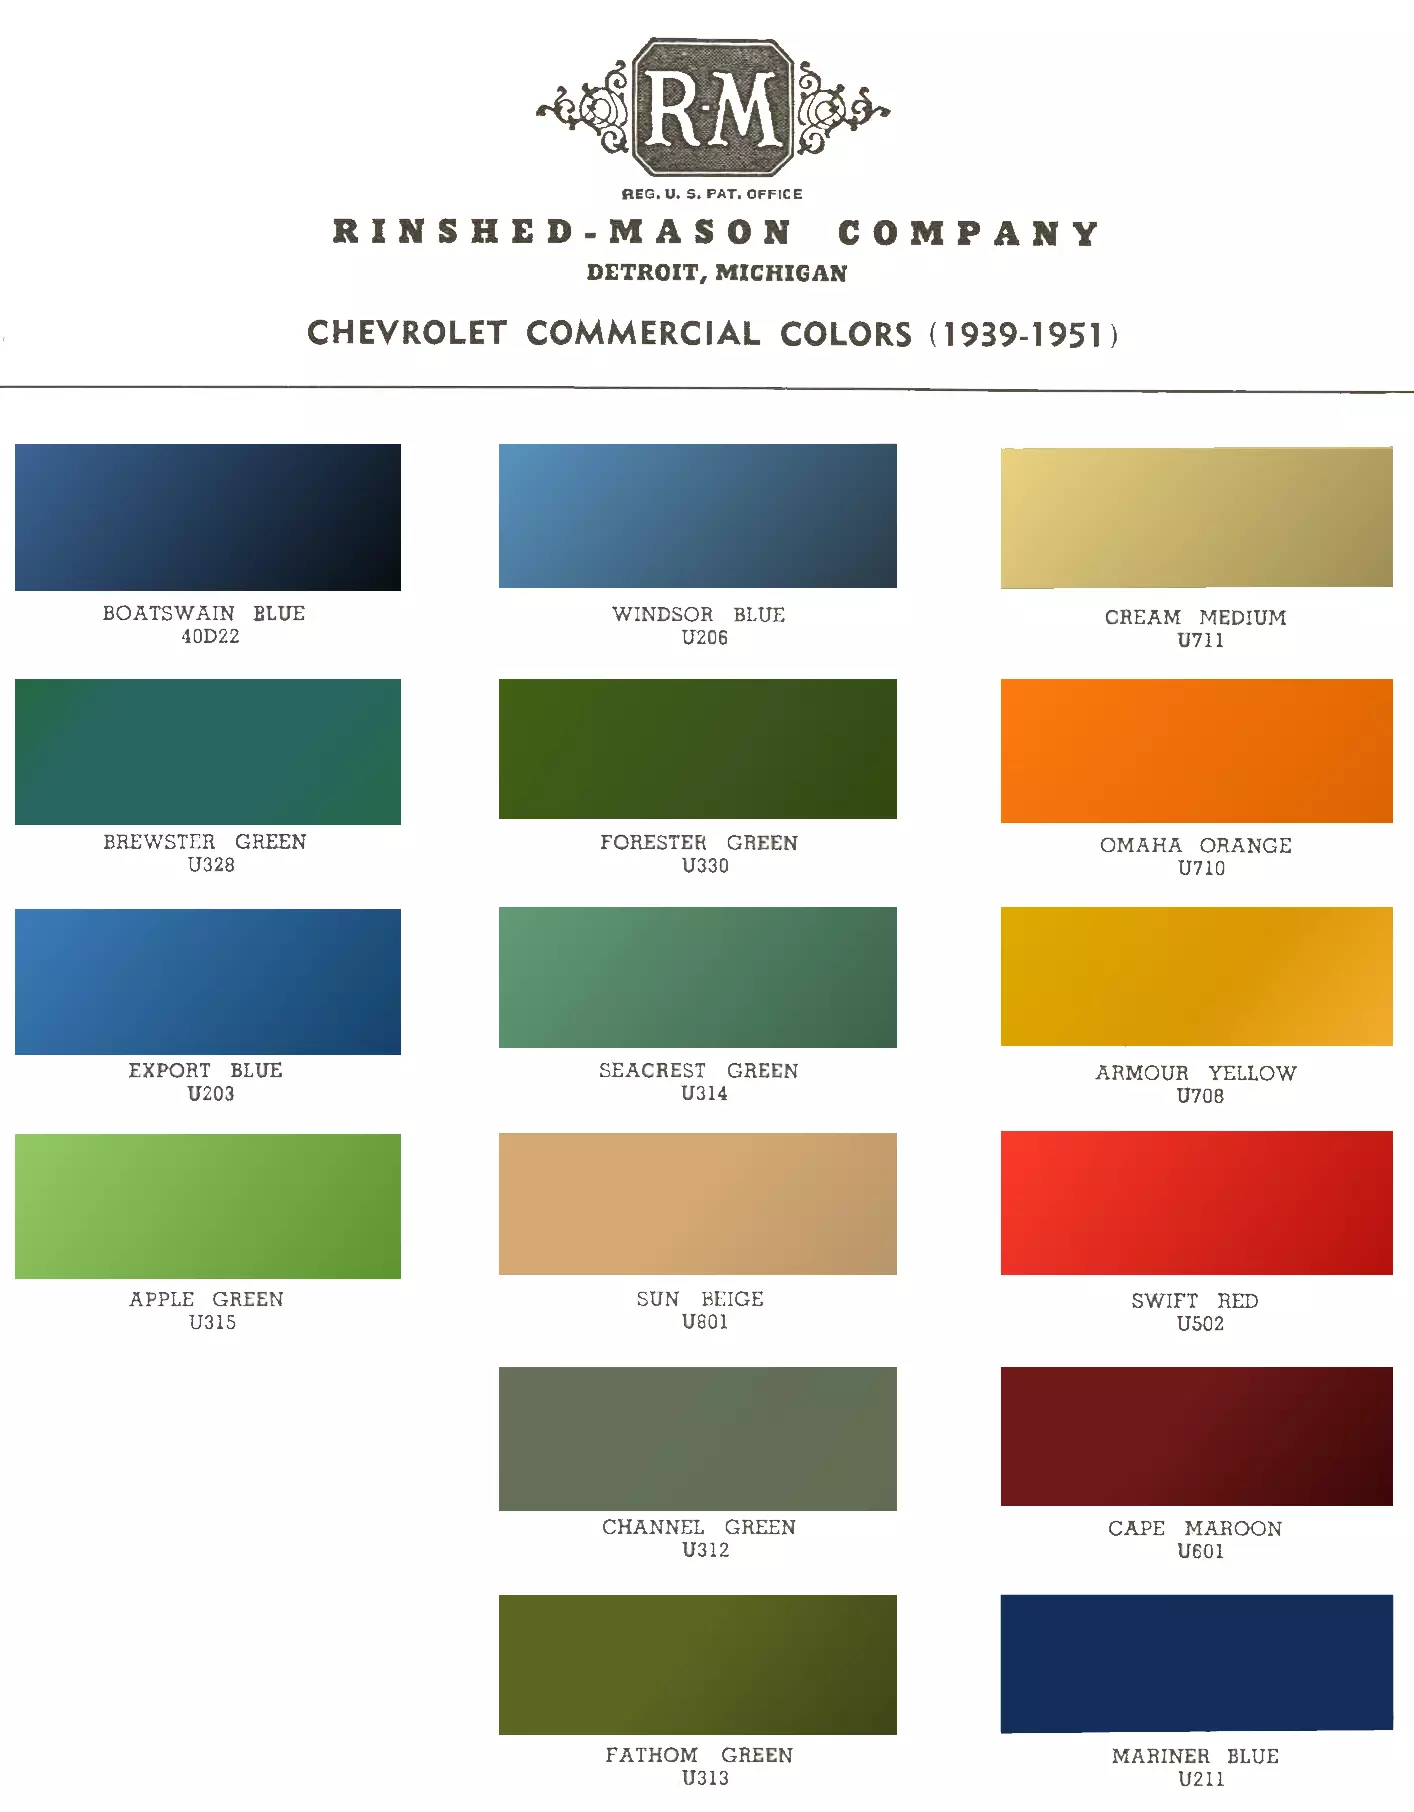 General Motors Commerical Vehicle Color Choices